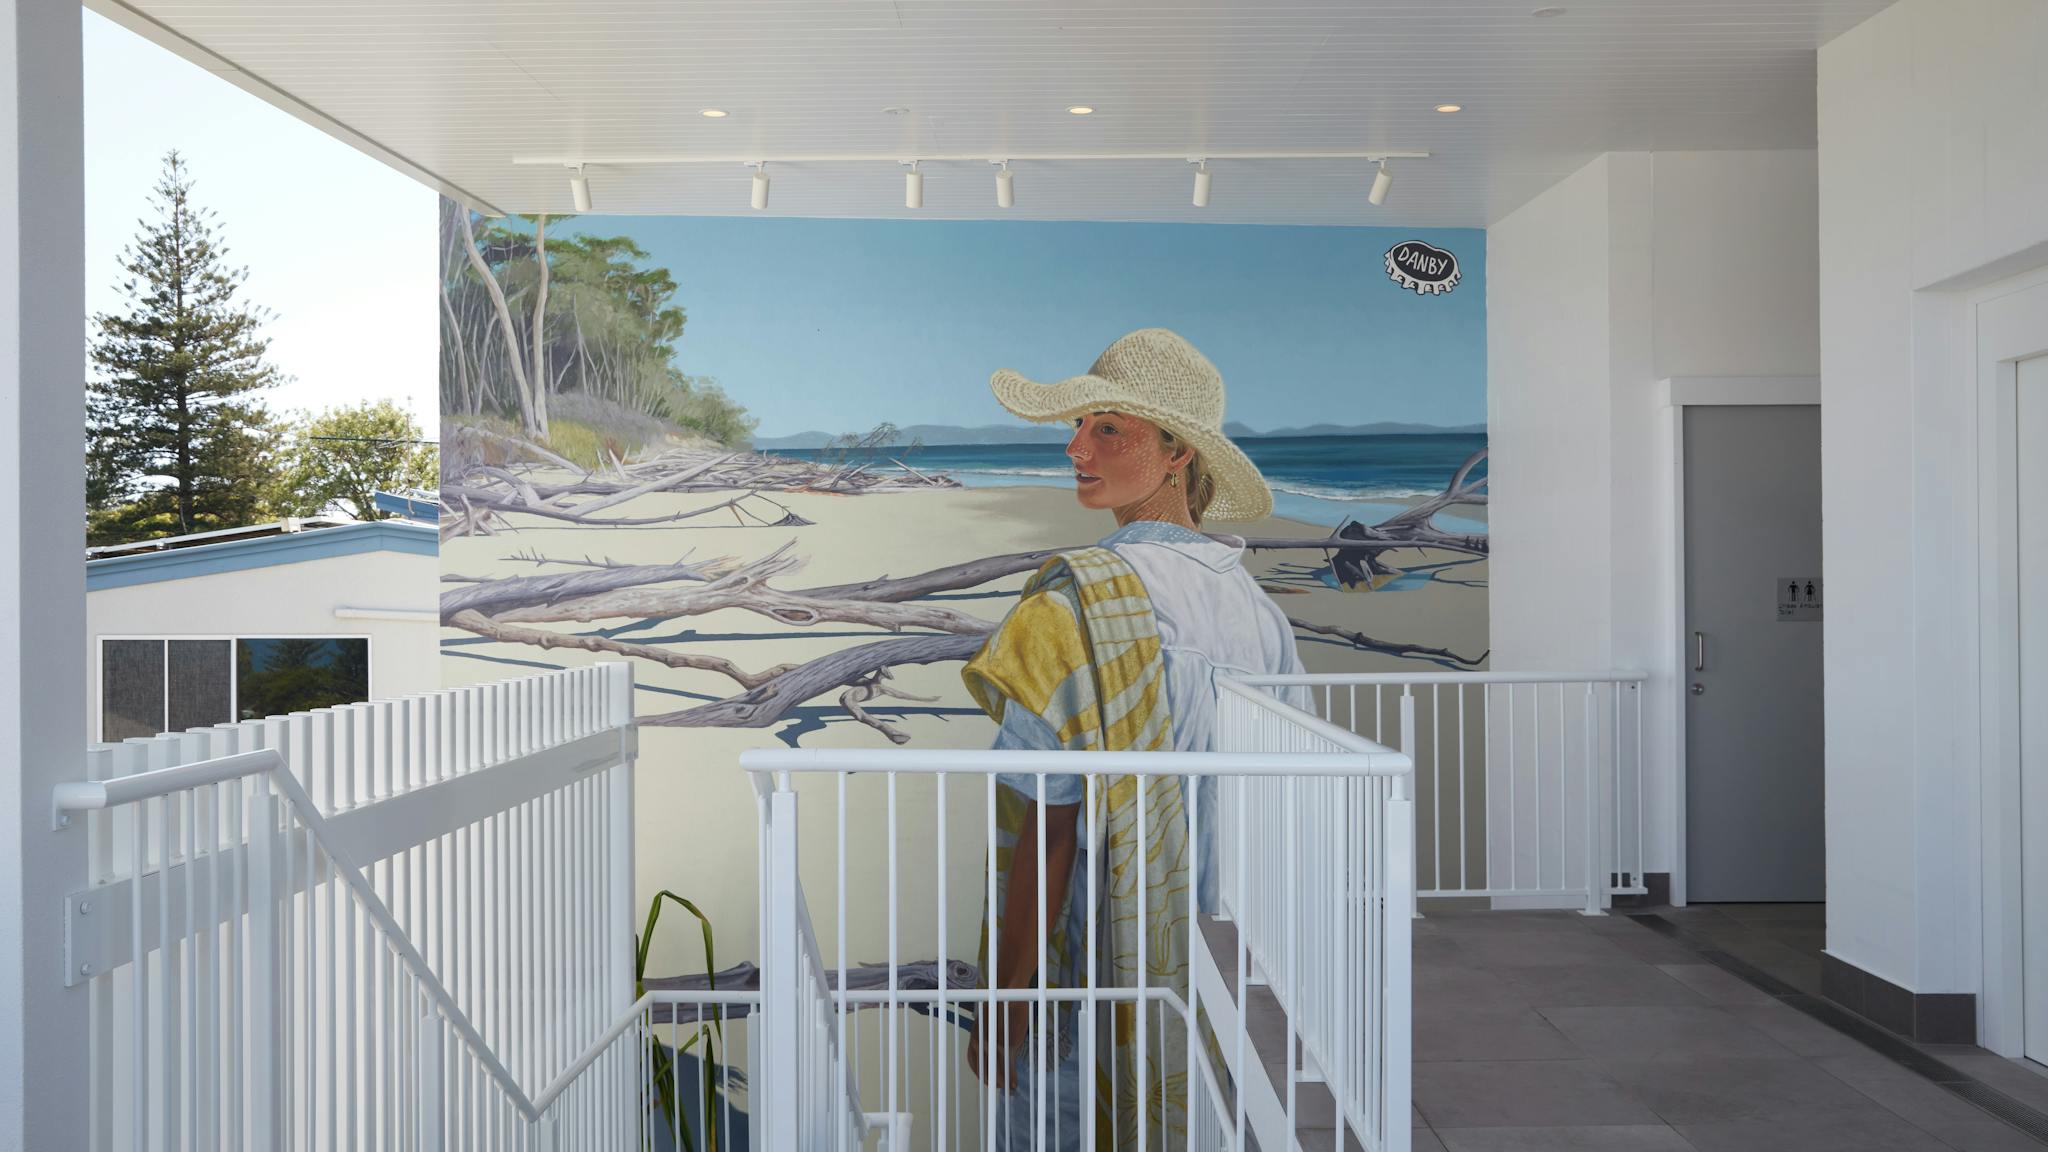 Mural of lady walking on a beach surrounded by driftwood